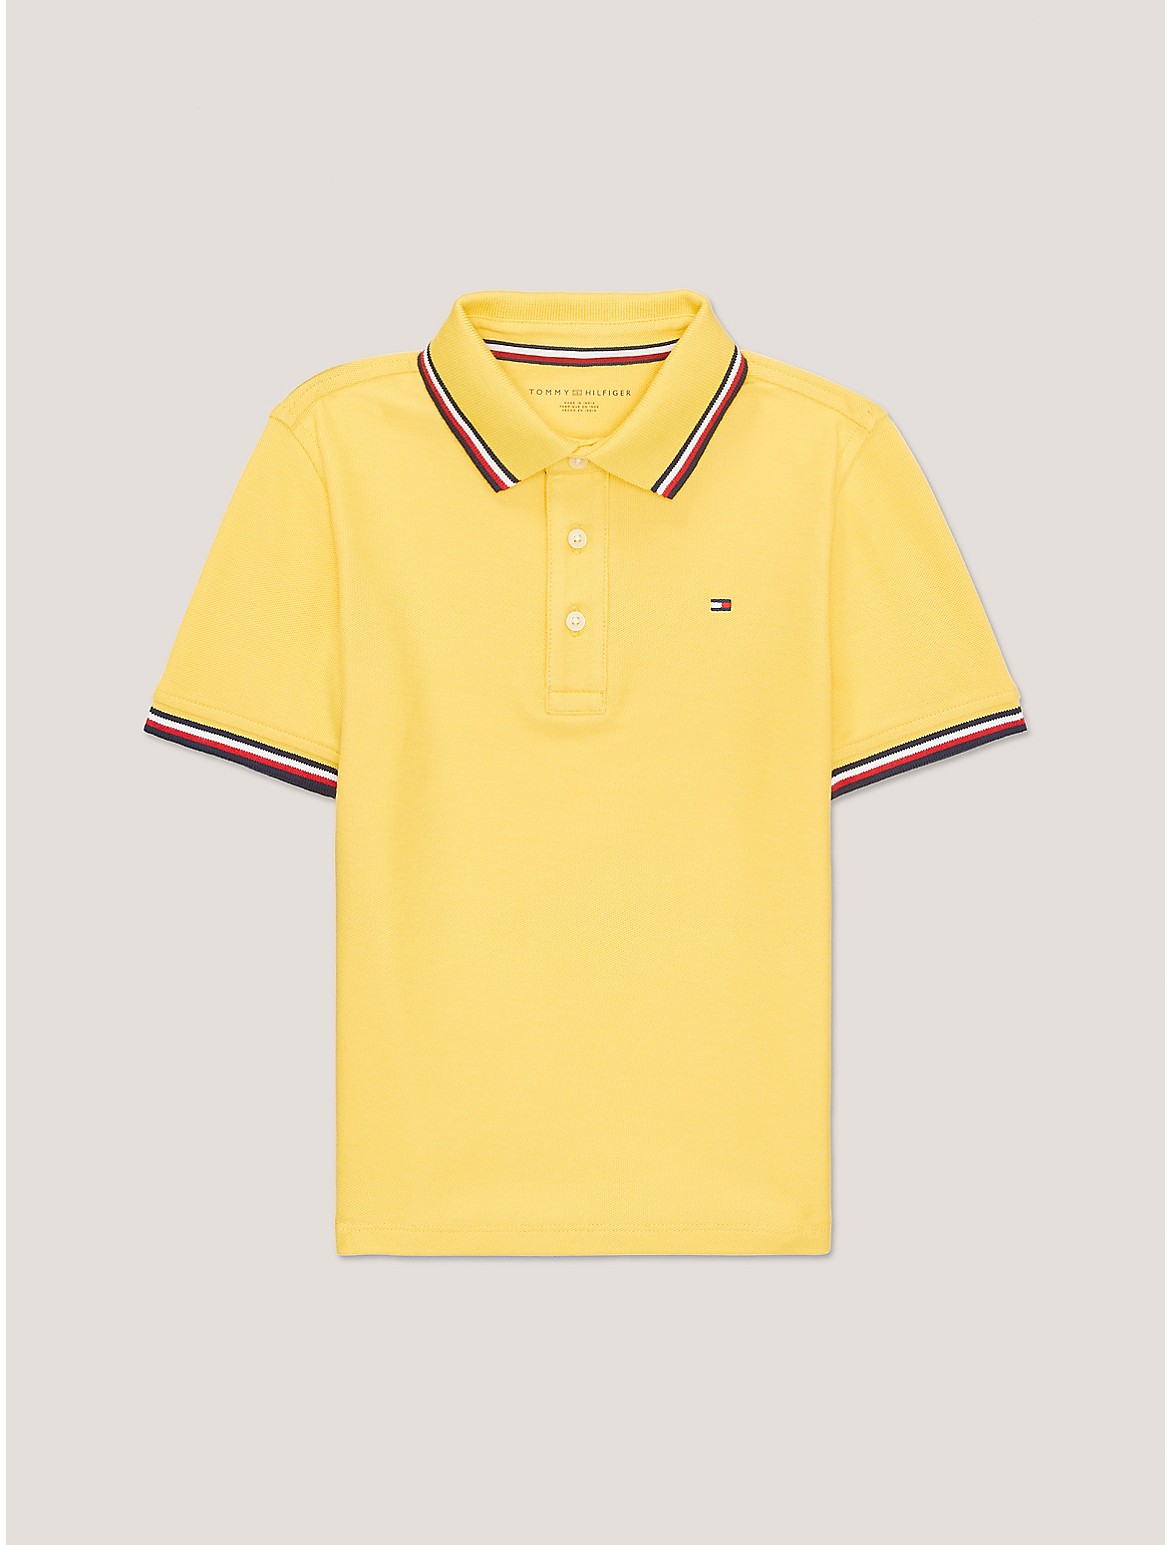 Tommy Hilfiger Boys' Kids' Tommy Wicking Polo - Yellow - XL